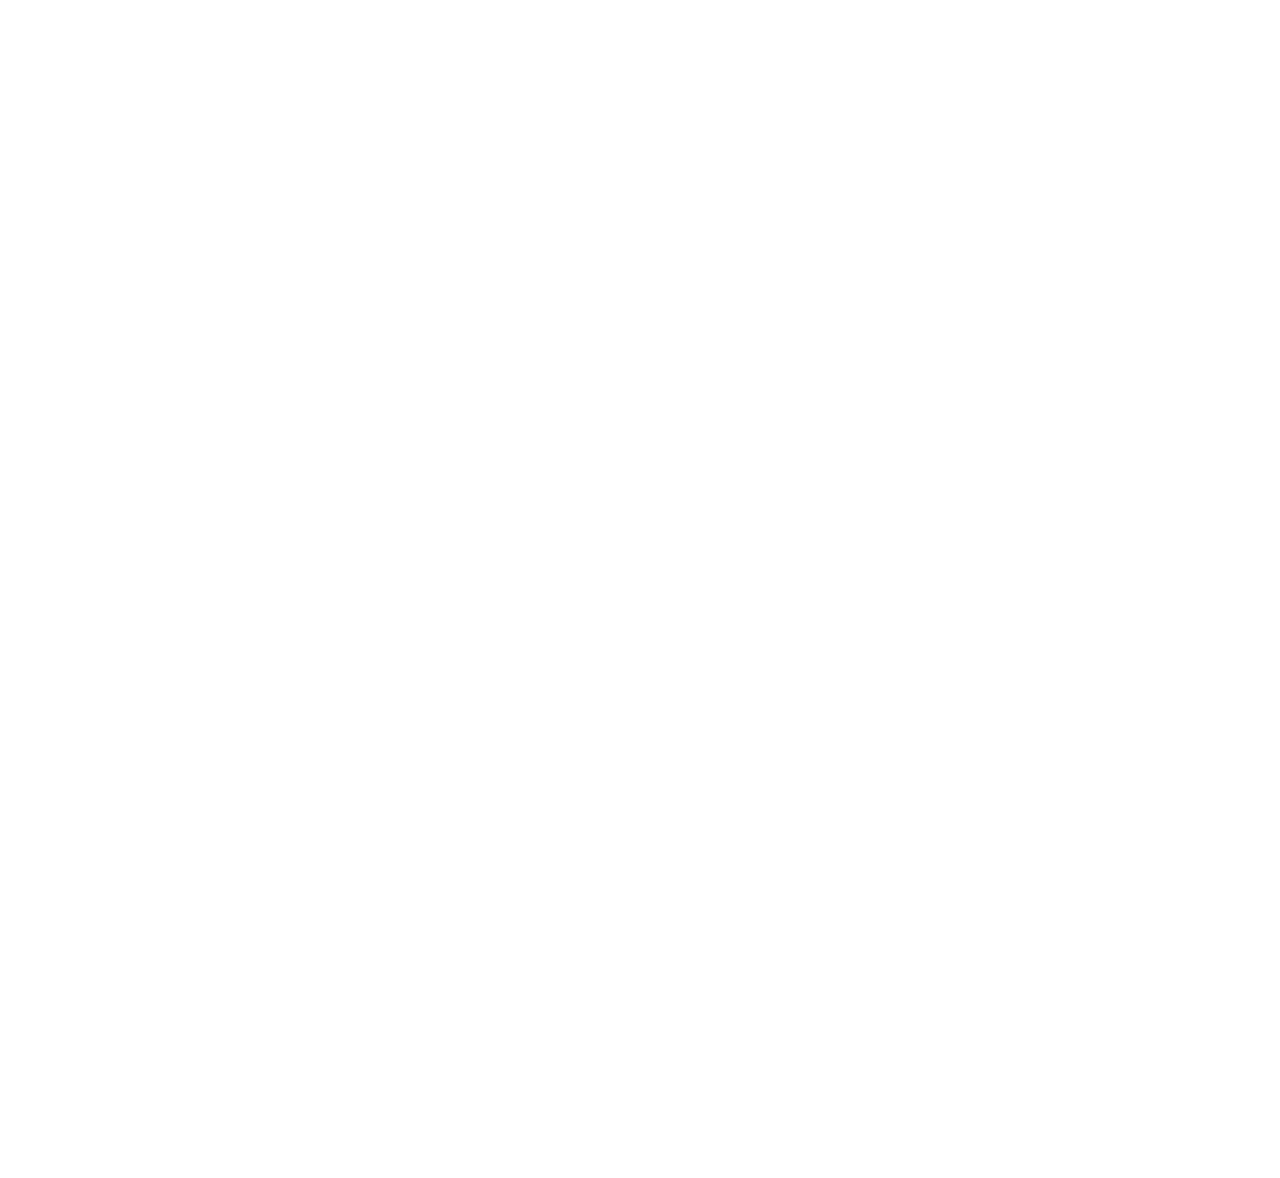 The 
Glamour
Clinic's logo